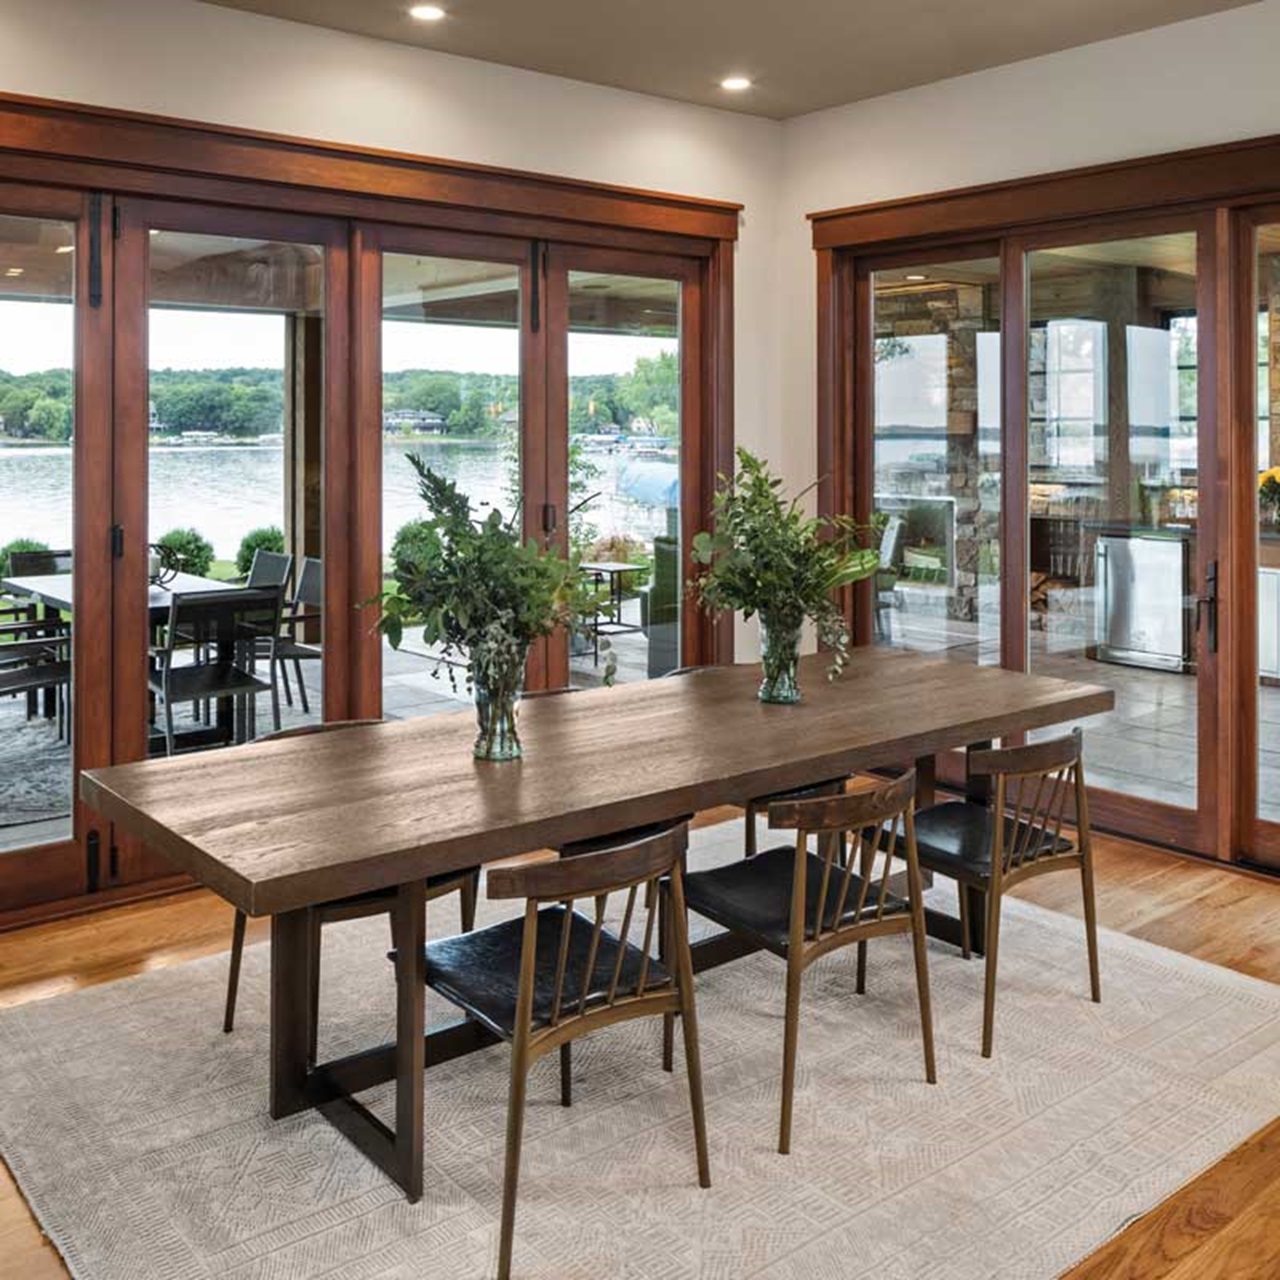 Dining room with wood table and chairs looking out to a lake through wood sliding patio door